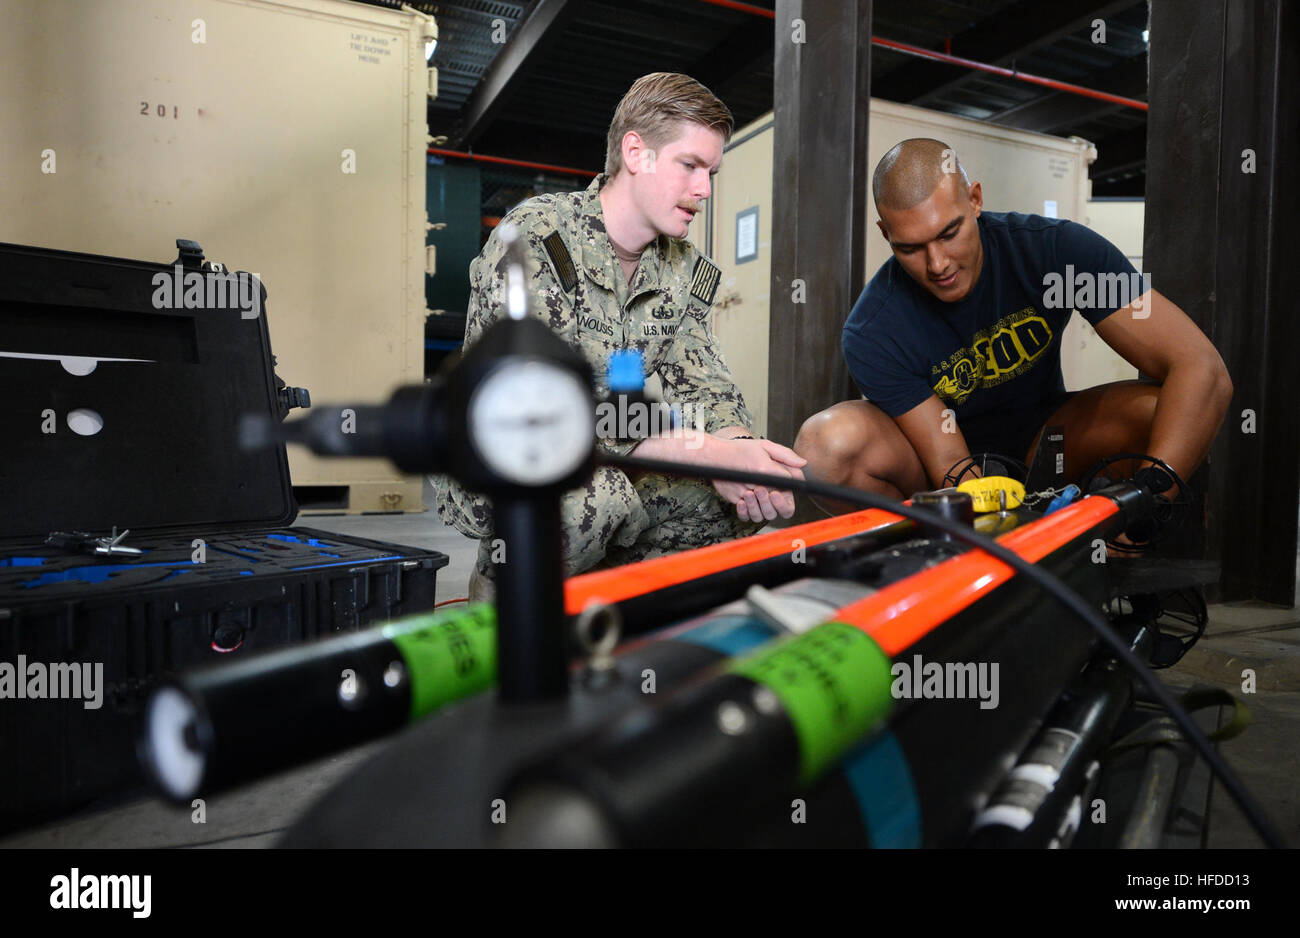 U.S. Navy Explosive Ordnance Disposal (EOD) Technician 2nd Class Michael Ganousis, left, and EOD Technician 3rd Class Troy Padmore, both assigned to a mine countermeasures team with Commander, Task Group (CTG) 56.1, conduct training on an Atlas Elektronik SeaFox ordnance disposal system at Naval Support Activity Bahrain in Manama, Bahrain, Feb. 9, 2014. CTG-56.1 conducted mine countermeasures, explosive ordnance disposal, salvage diving and force protection operations throughout the U.S. 5th Fleet area of responsibility. (U.S. Navy photo by Mass Communication Specialist 1st Class Michelle L. T Stock Photo